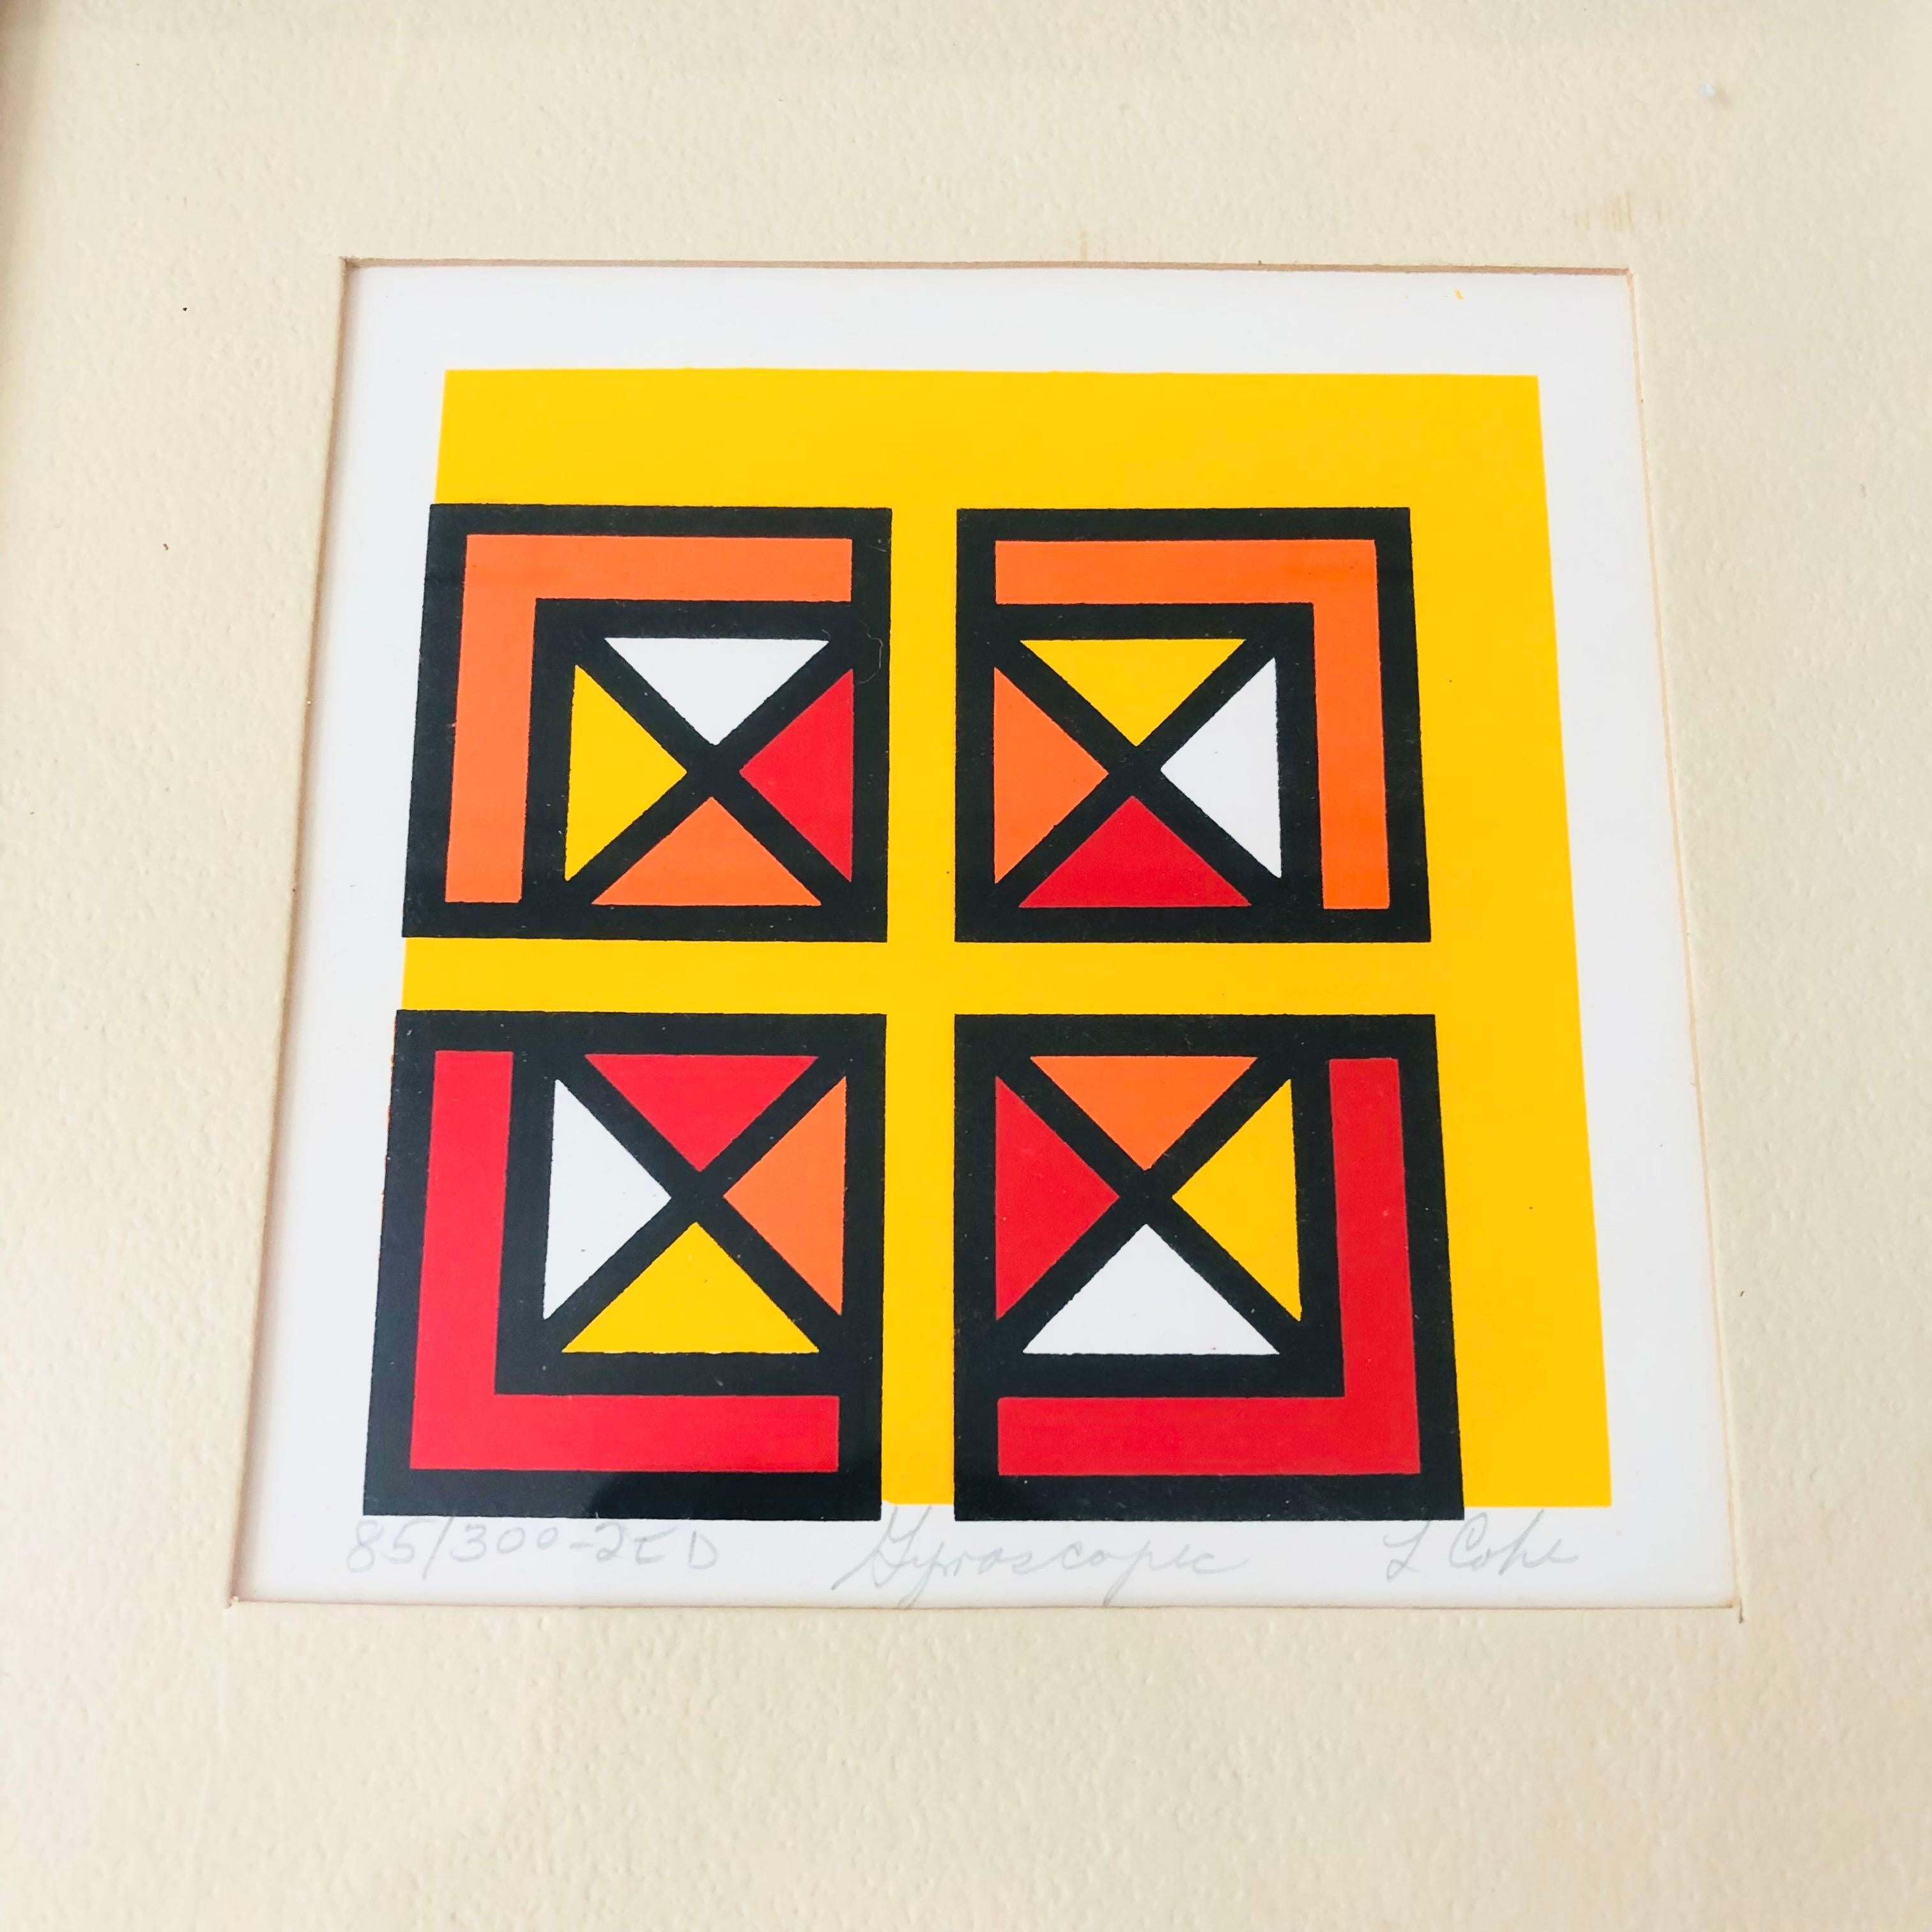 Mid-Century Modern 1970s Geometric Abstract Serigraph by L Cohe Titled 